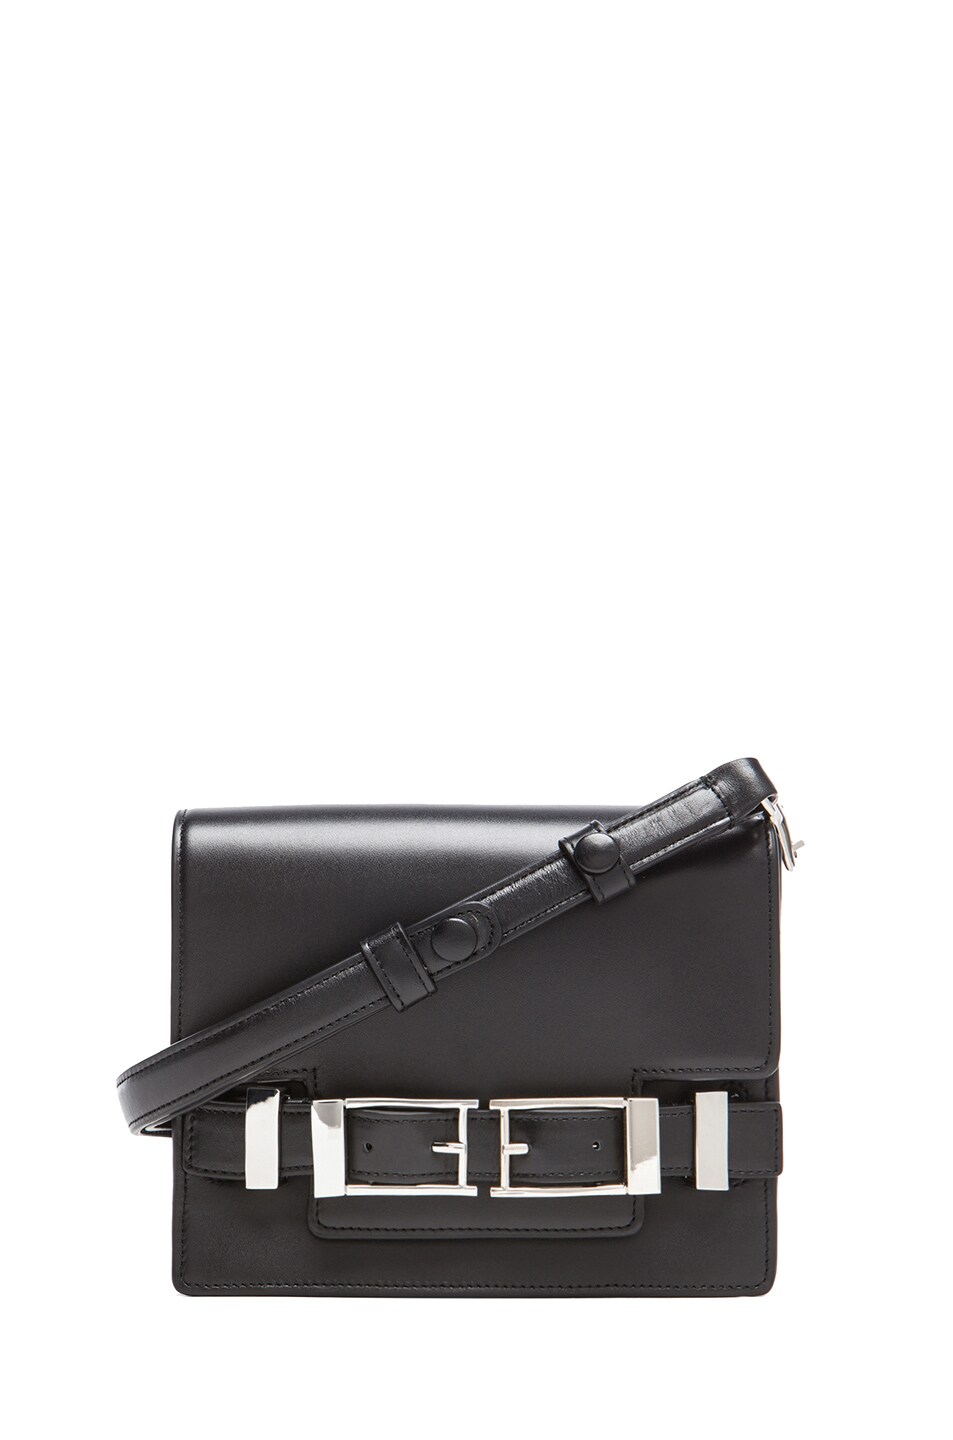 Image 1 of A.L.C. Davenport Crossbody in Black & Nickle